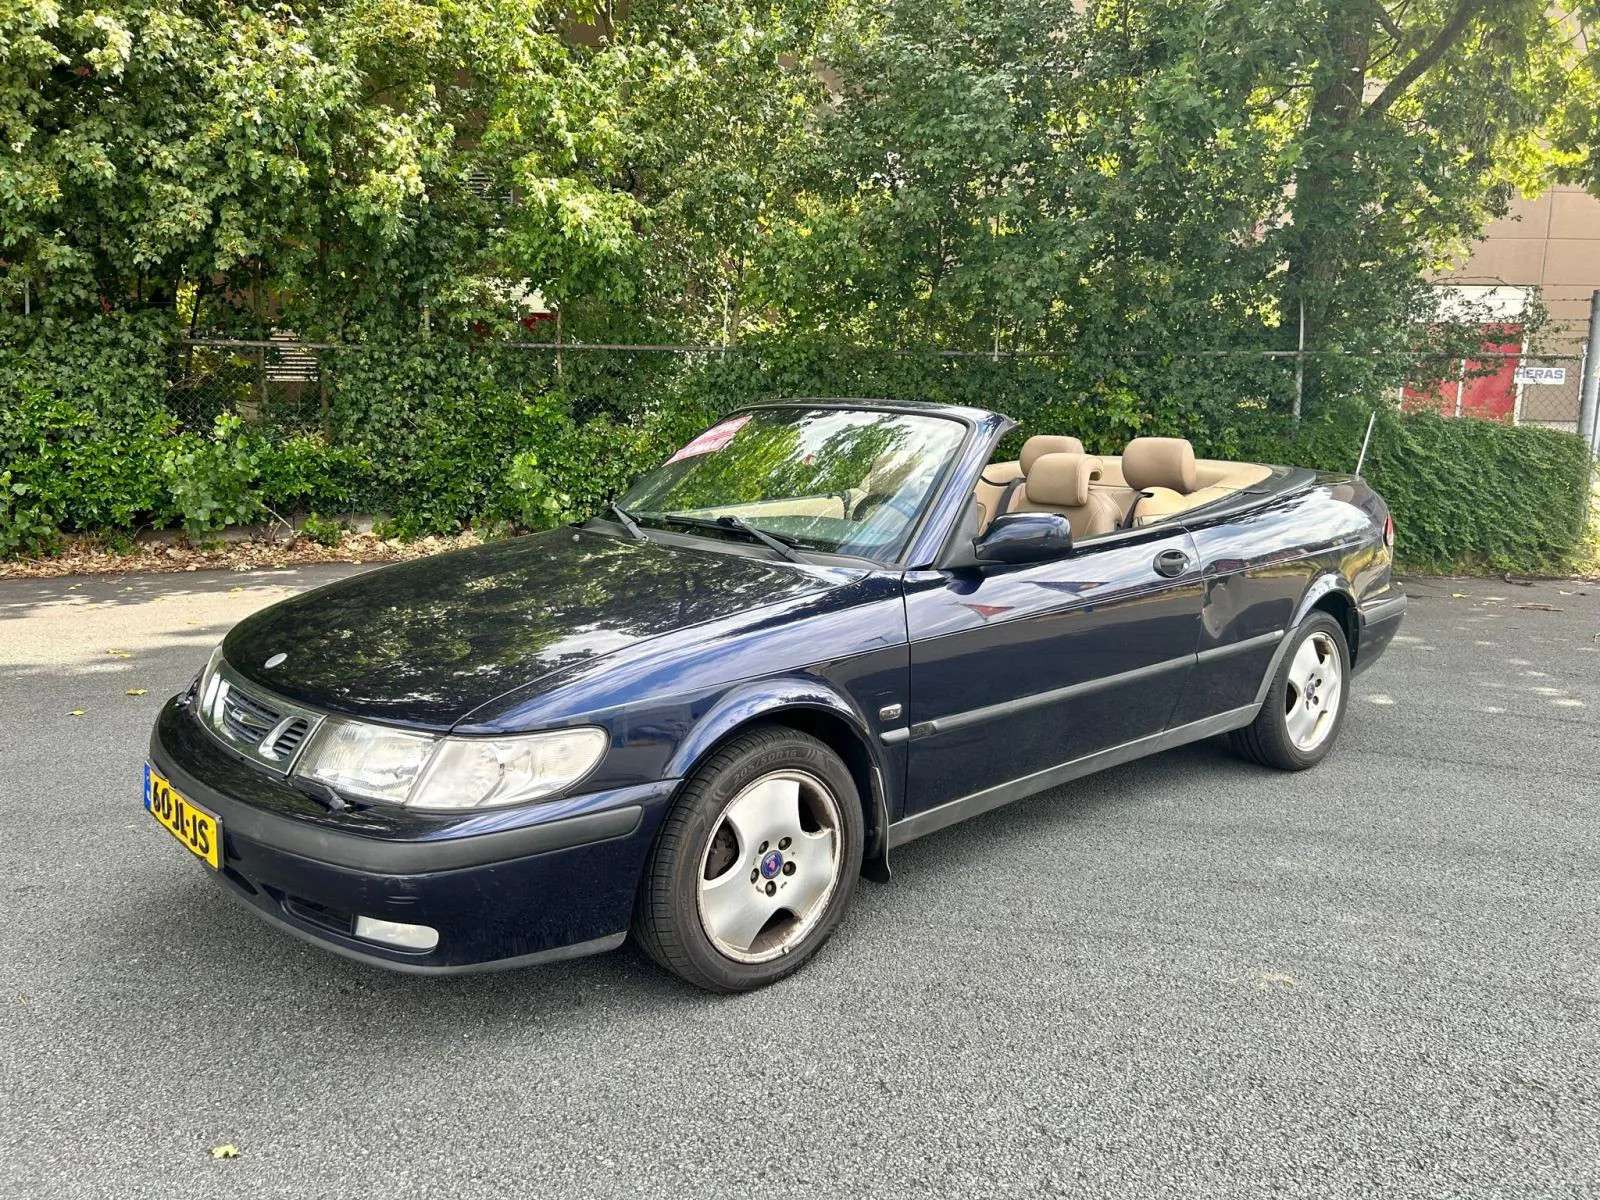 Saab 9-3 Convertible in Blue used in DEVENTER for € 3,399.-